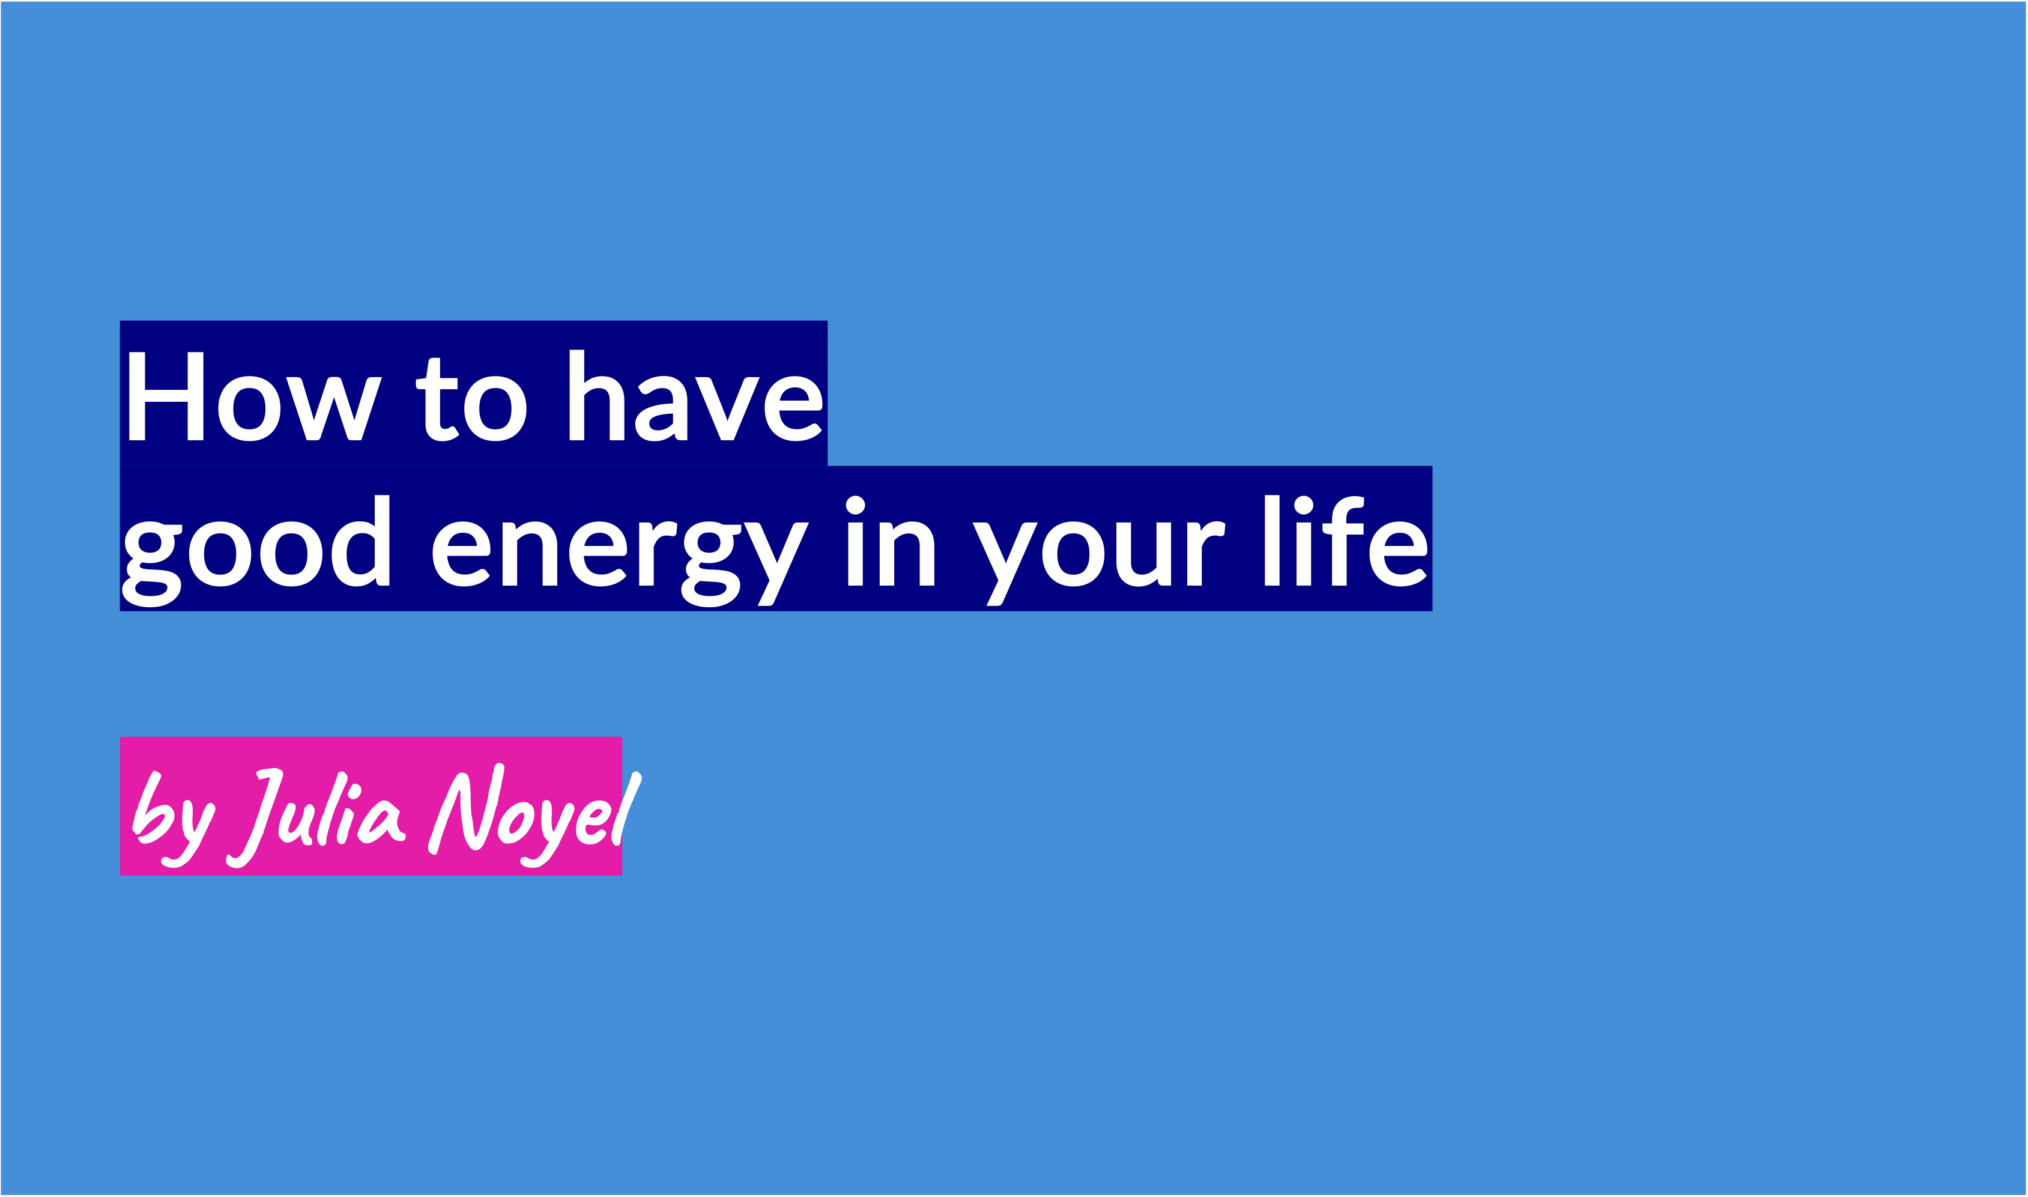 How to have good energy in your life by Julia Noyel